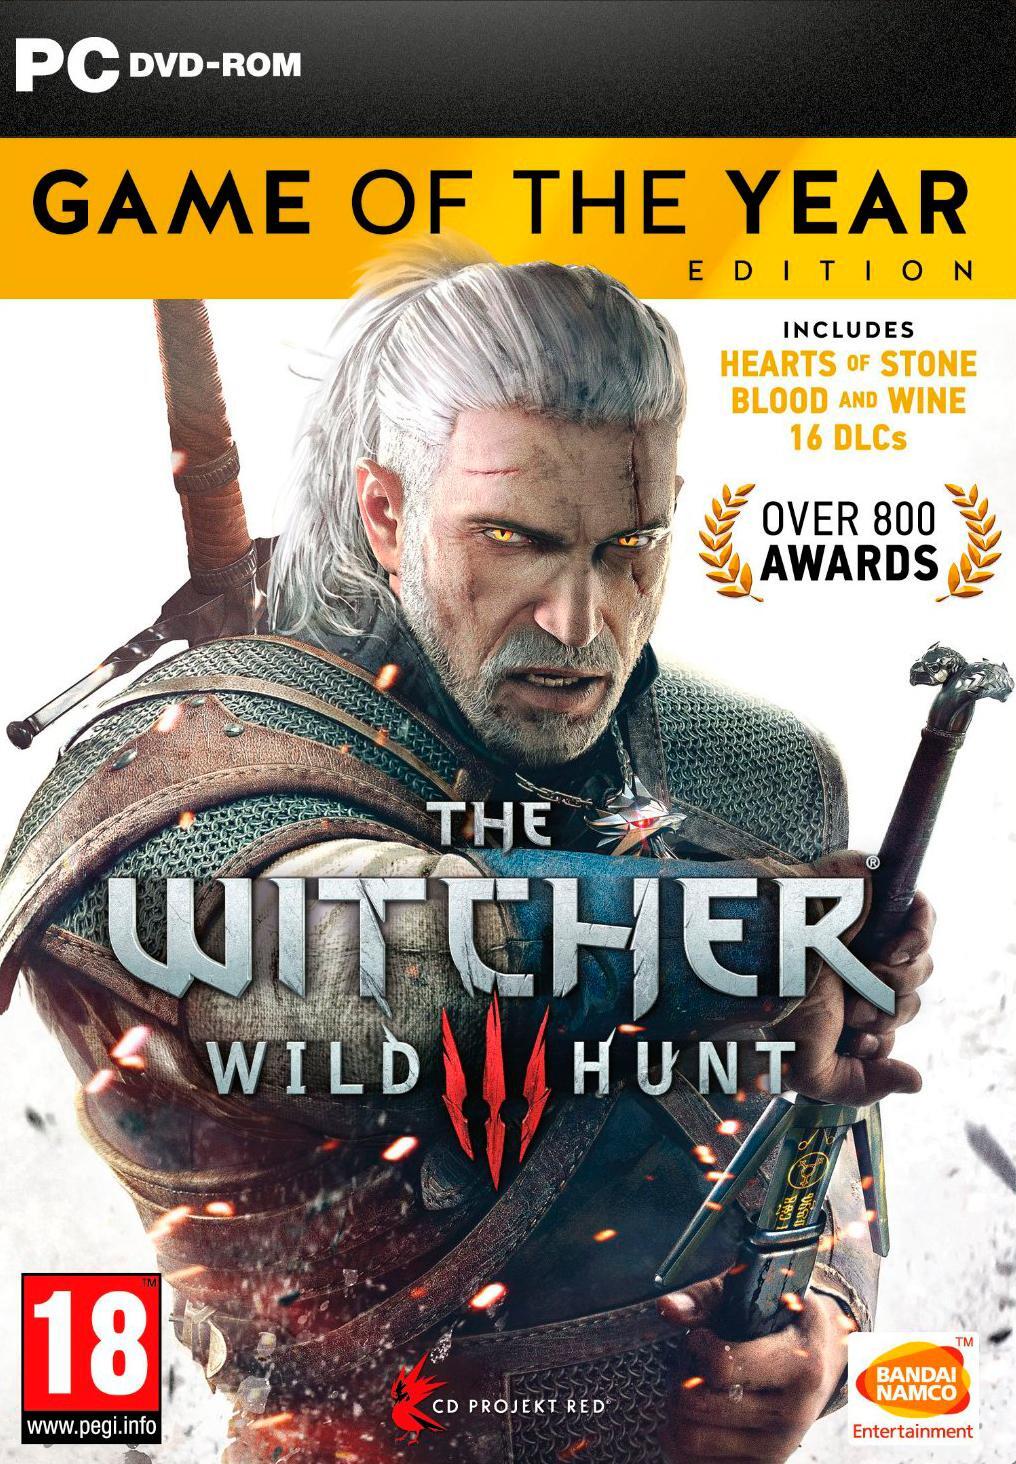 Namco Bandai The Witcher 3: Wild Hunt Game of the Year Edition PC